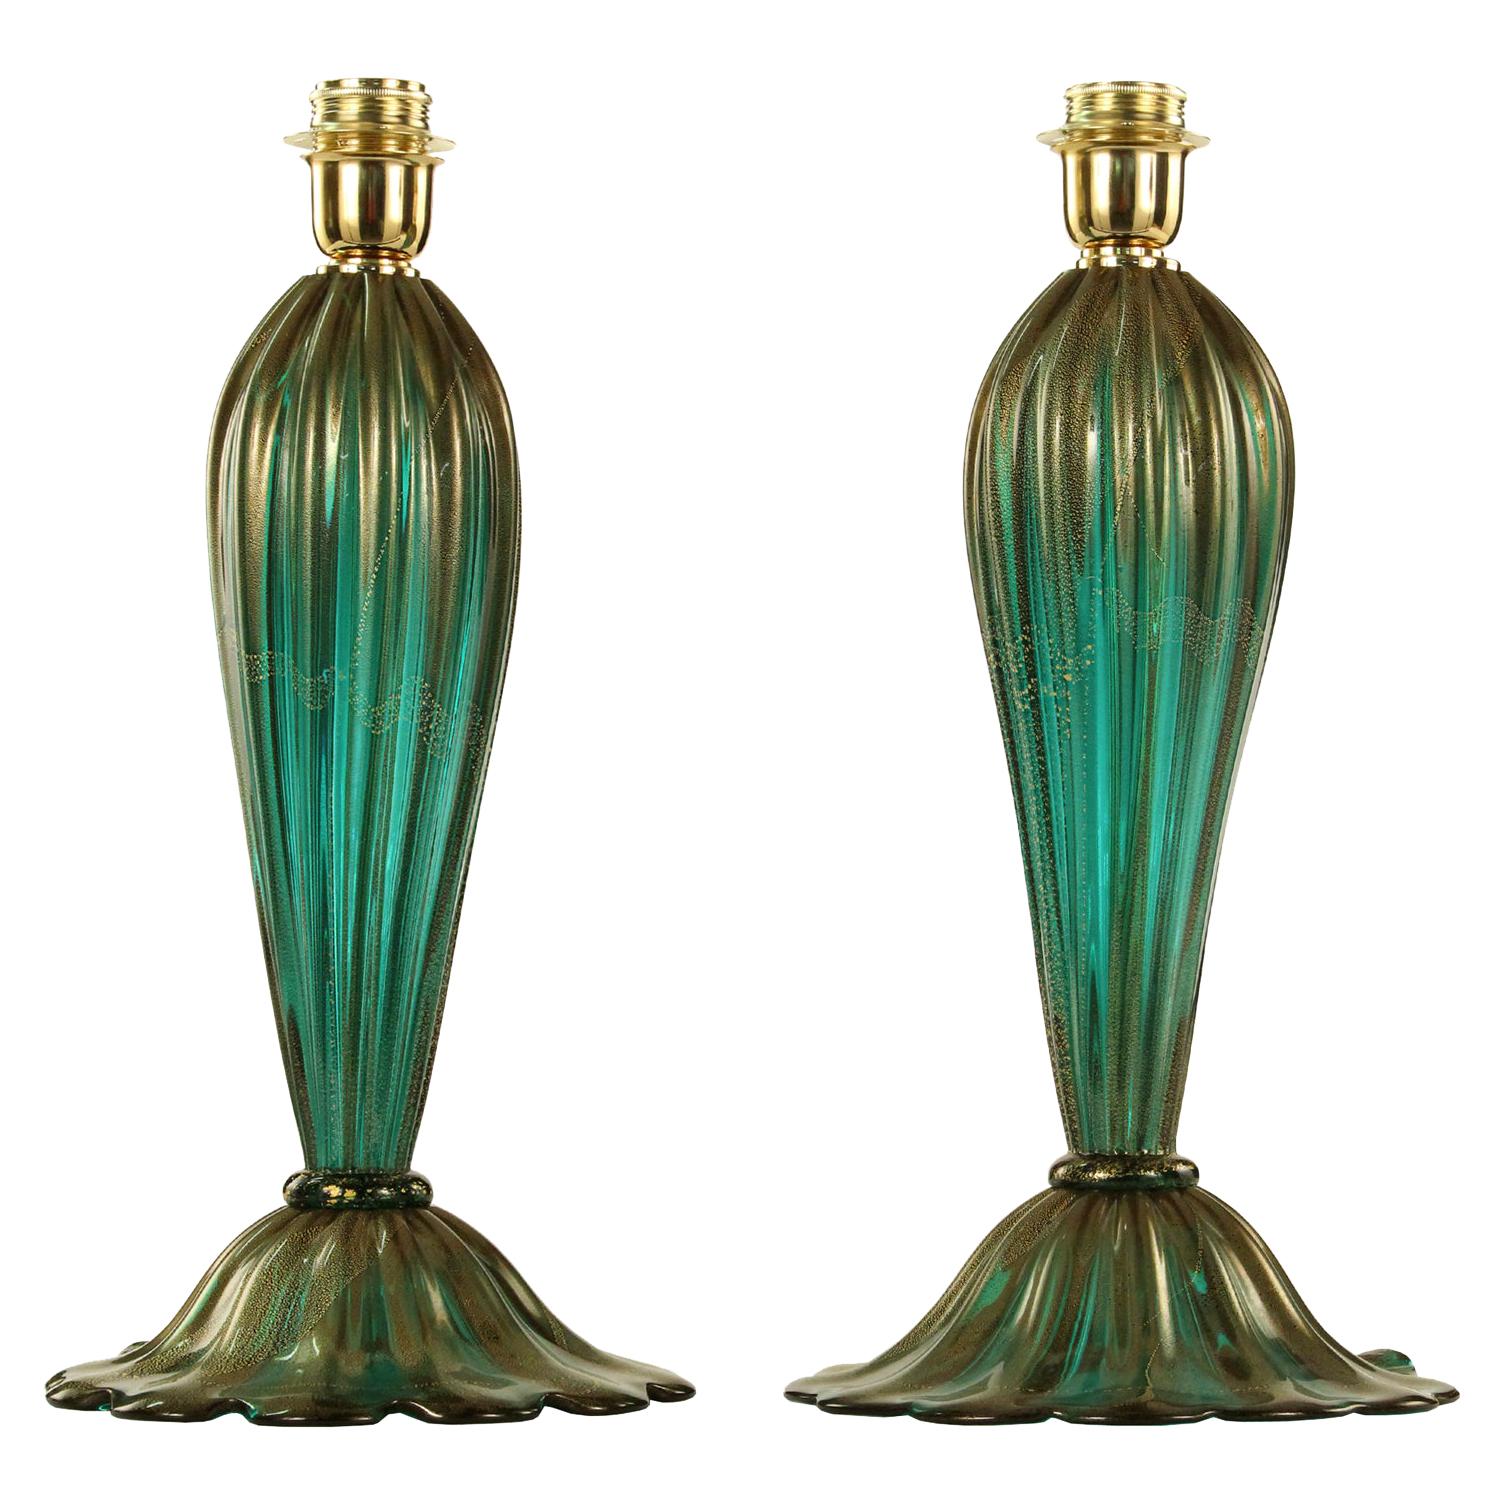 One table lamp with emerald colour with golden leaf artistic Murano glass 

The price doesn't include the lampshade that on request will be quoted apart.

ø 23 cm, h 46 cm

The handcrafted soul of our lighting products is reinvented every time we